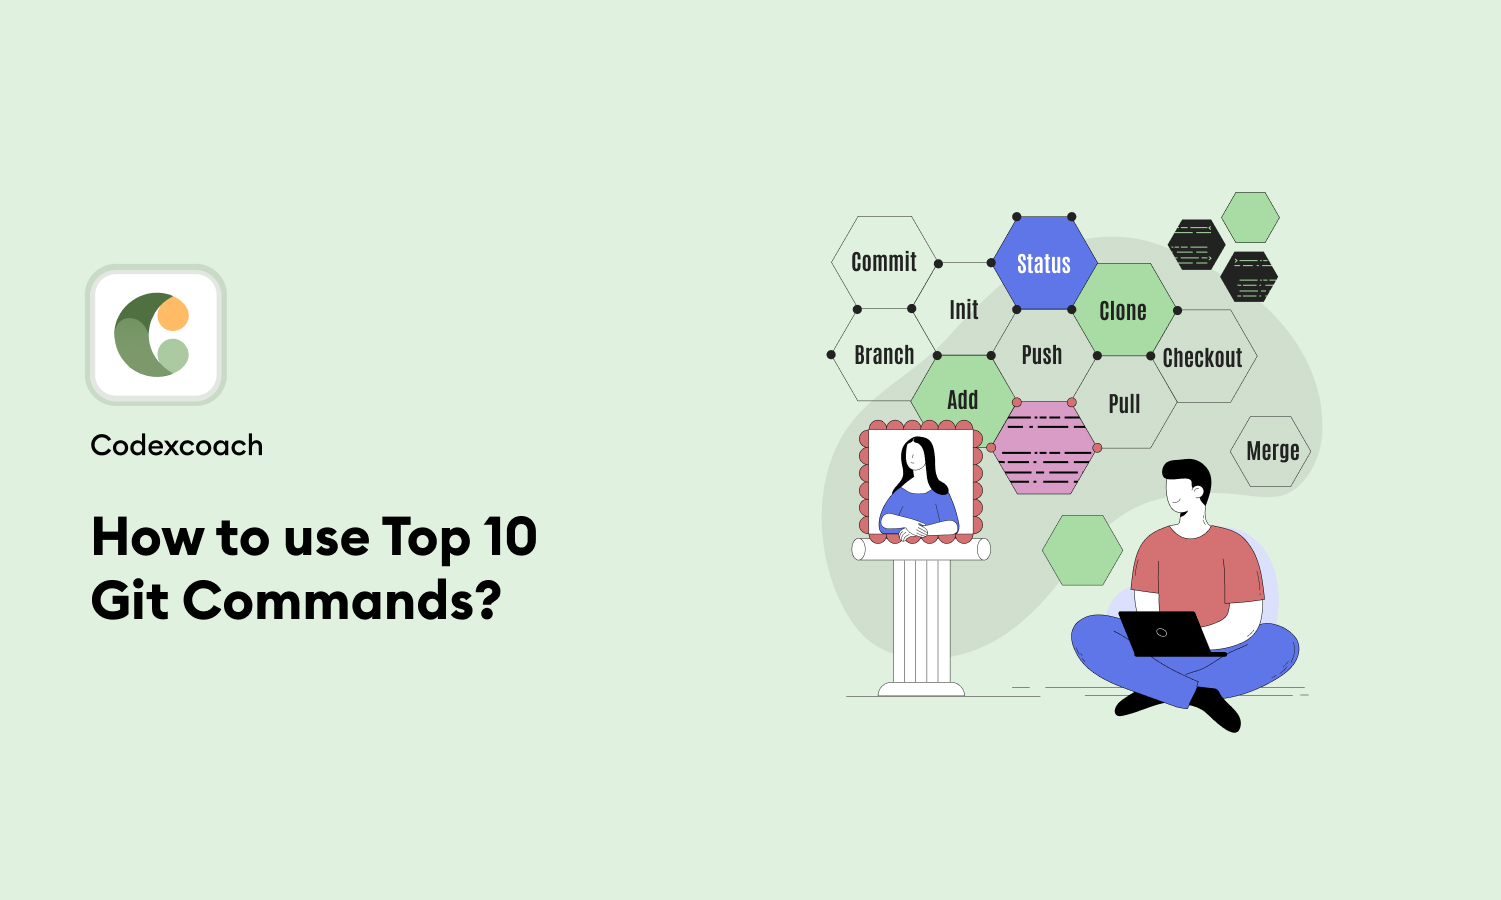 How to use Top 10 Git Commands